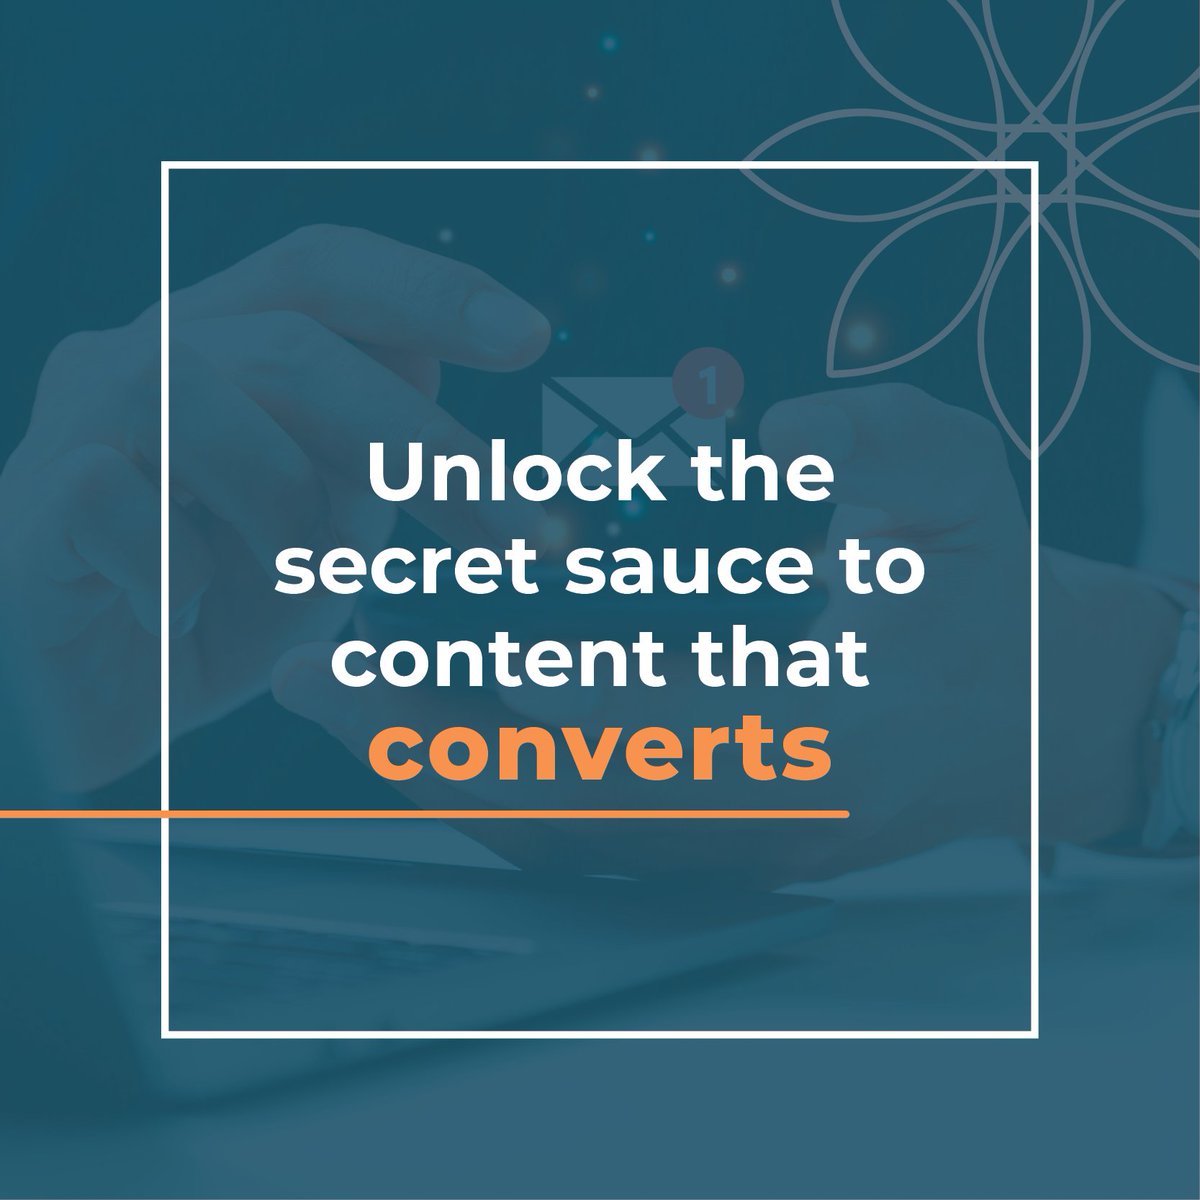 For an #inboundmarketing strategy, your website is the vehicle, and content is the fuel. Without content, a website is empty, and doesn’t drive revenue or leads. Learn how to create compelling content for conversion with our free eBook: hubs.ly/Q02rD_yL0. #ContentStrategy